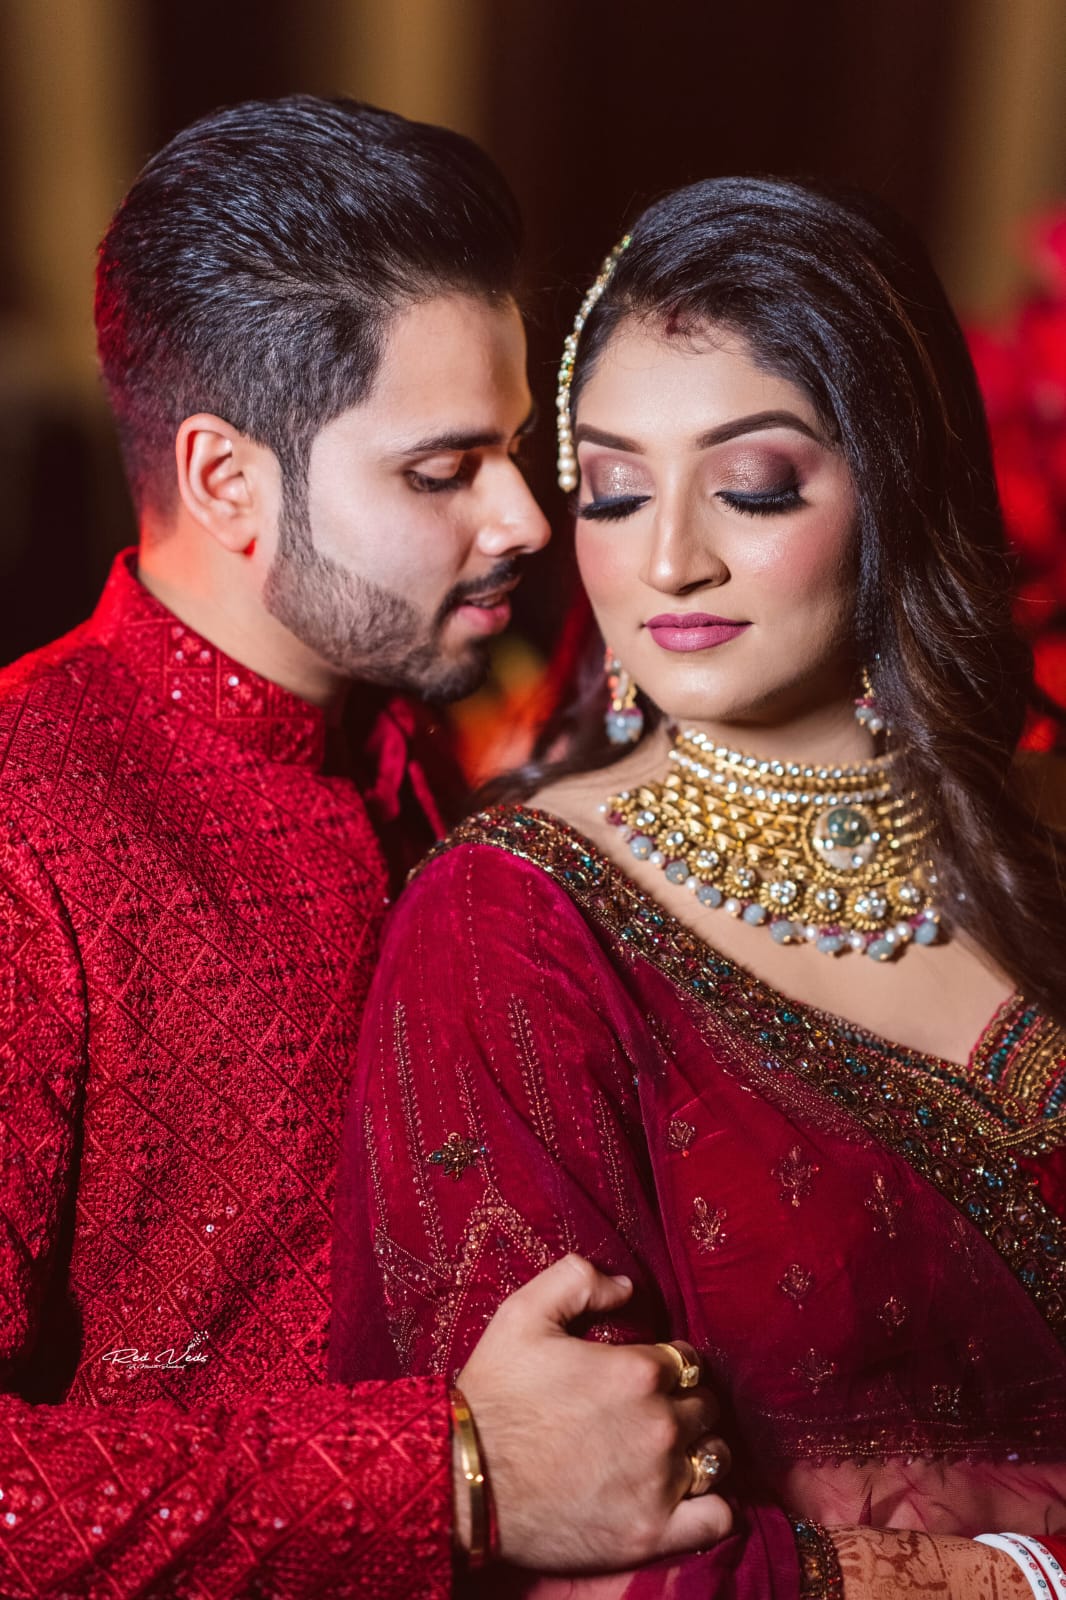 The growing importance of marriage media sites in Bangladesh